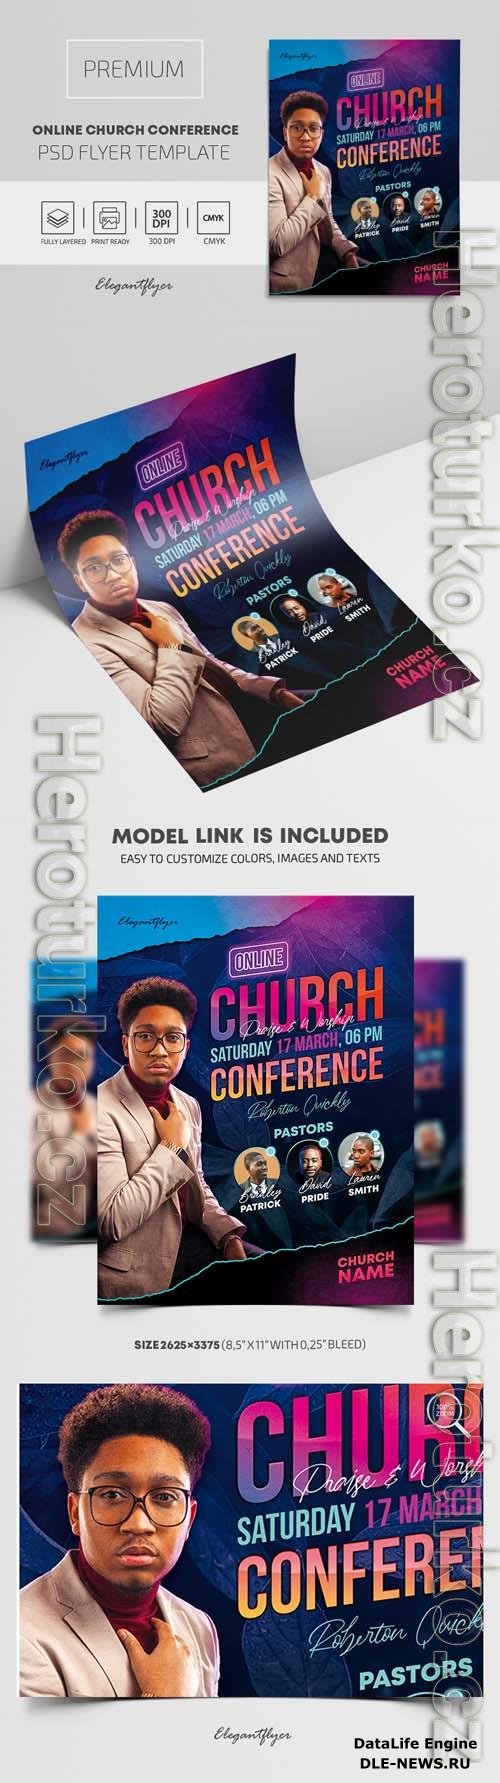 Online Church Conference Premium PSD Flyer Template